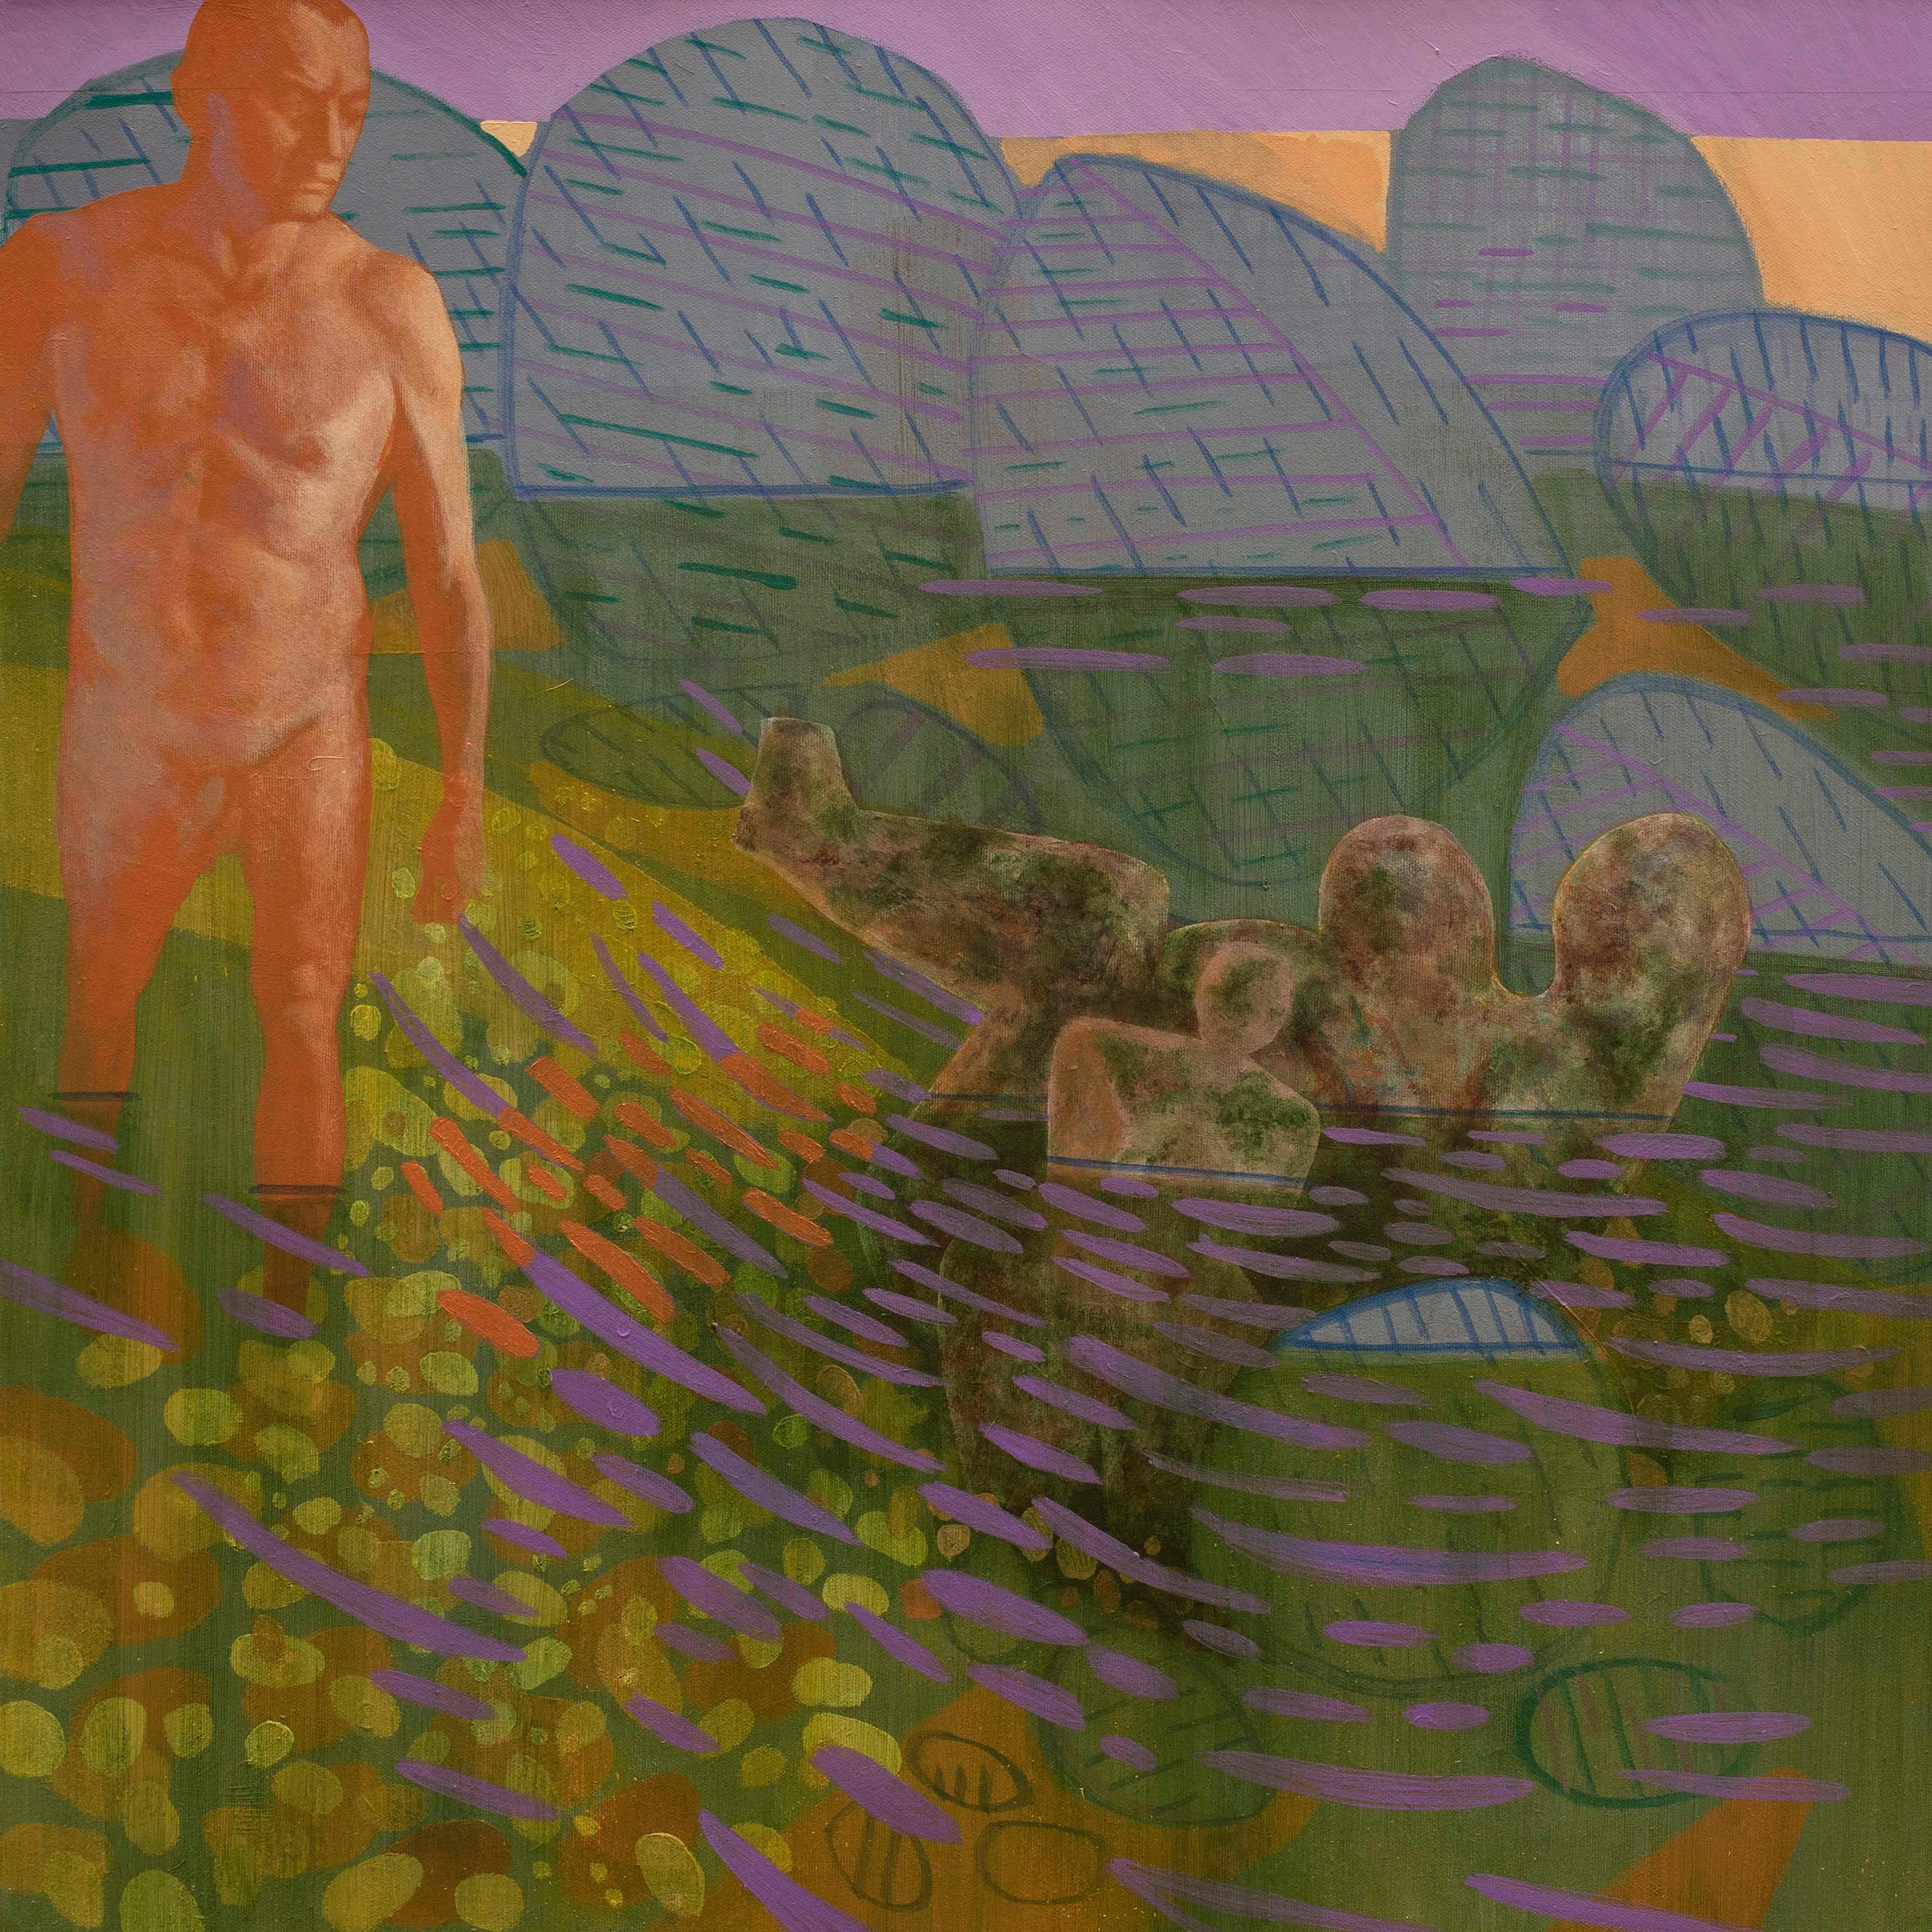 Idols Camouflage by Tide - Contemporary Art, Nude, Male, Green, Orange